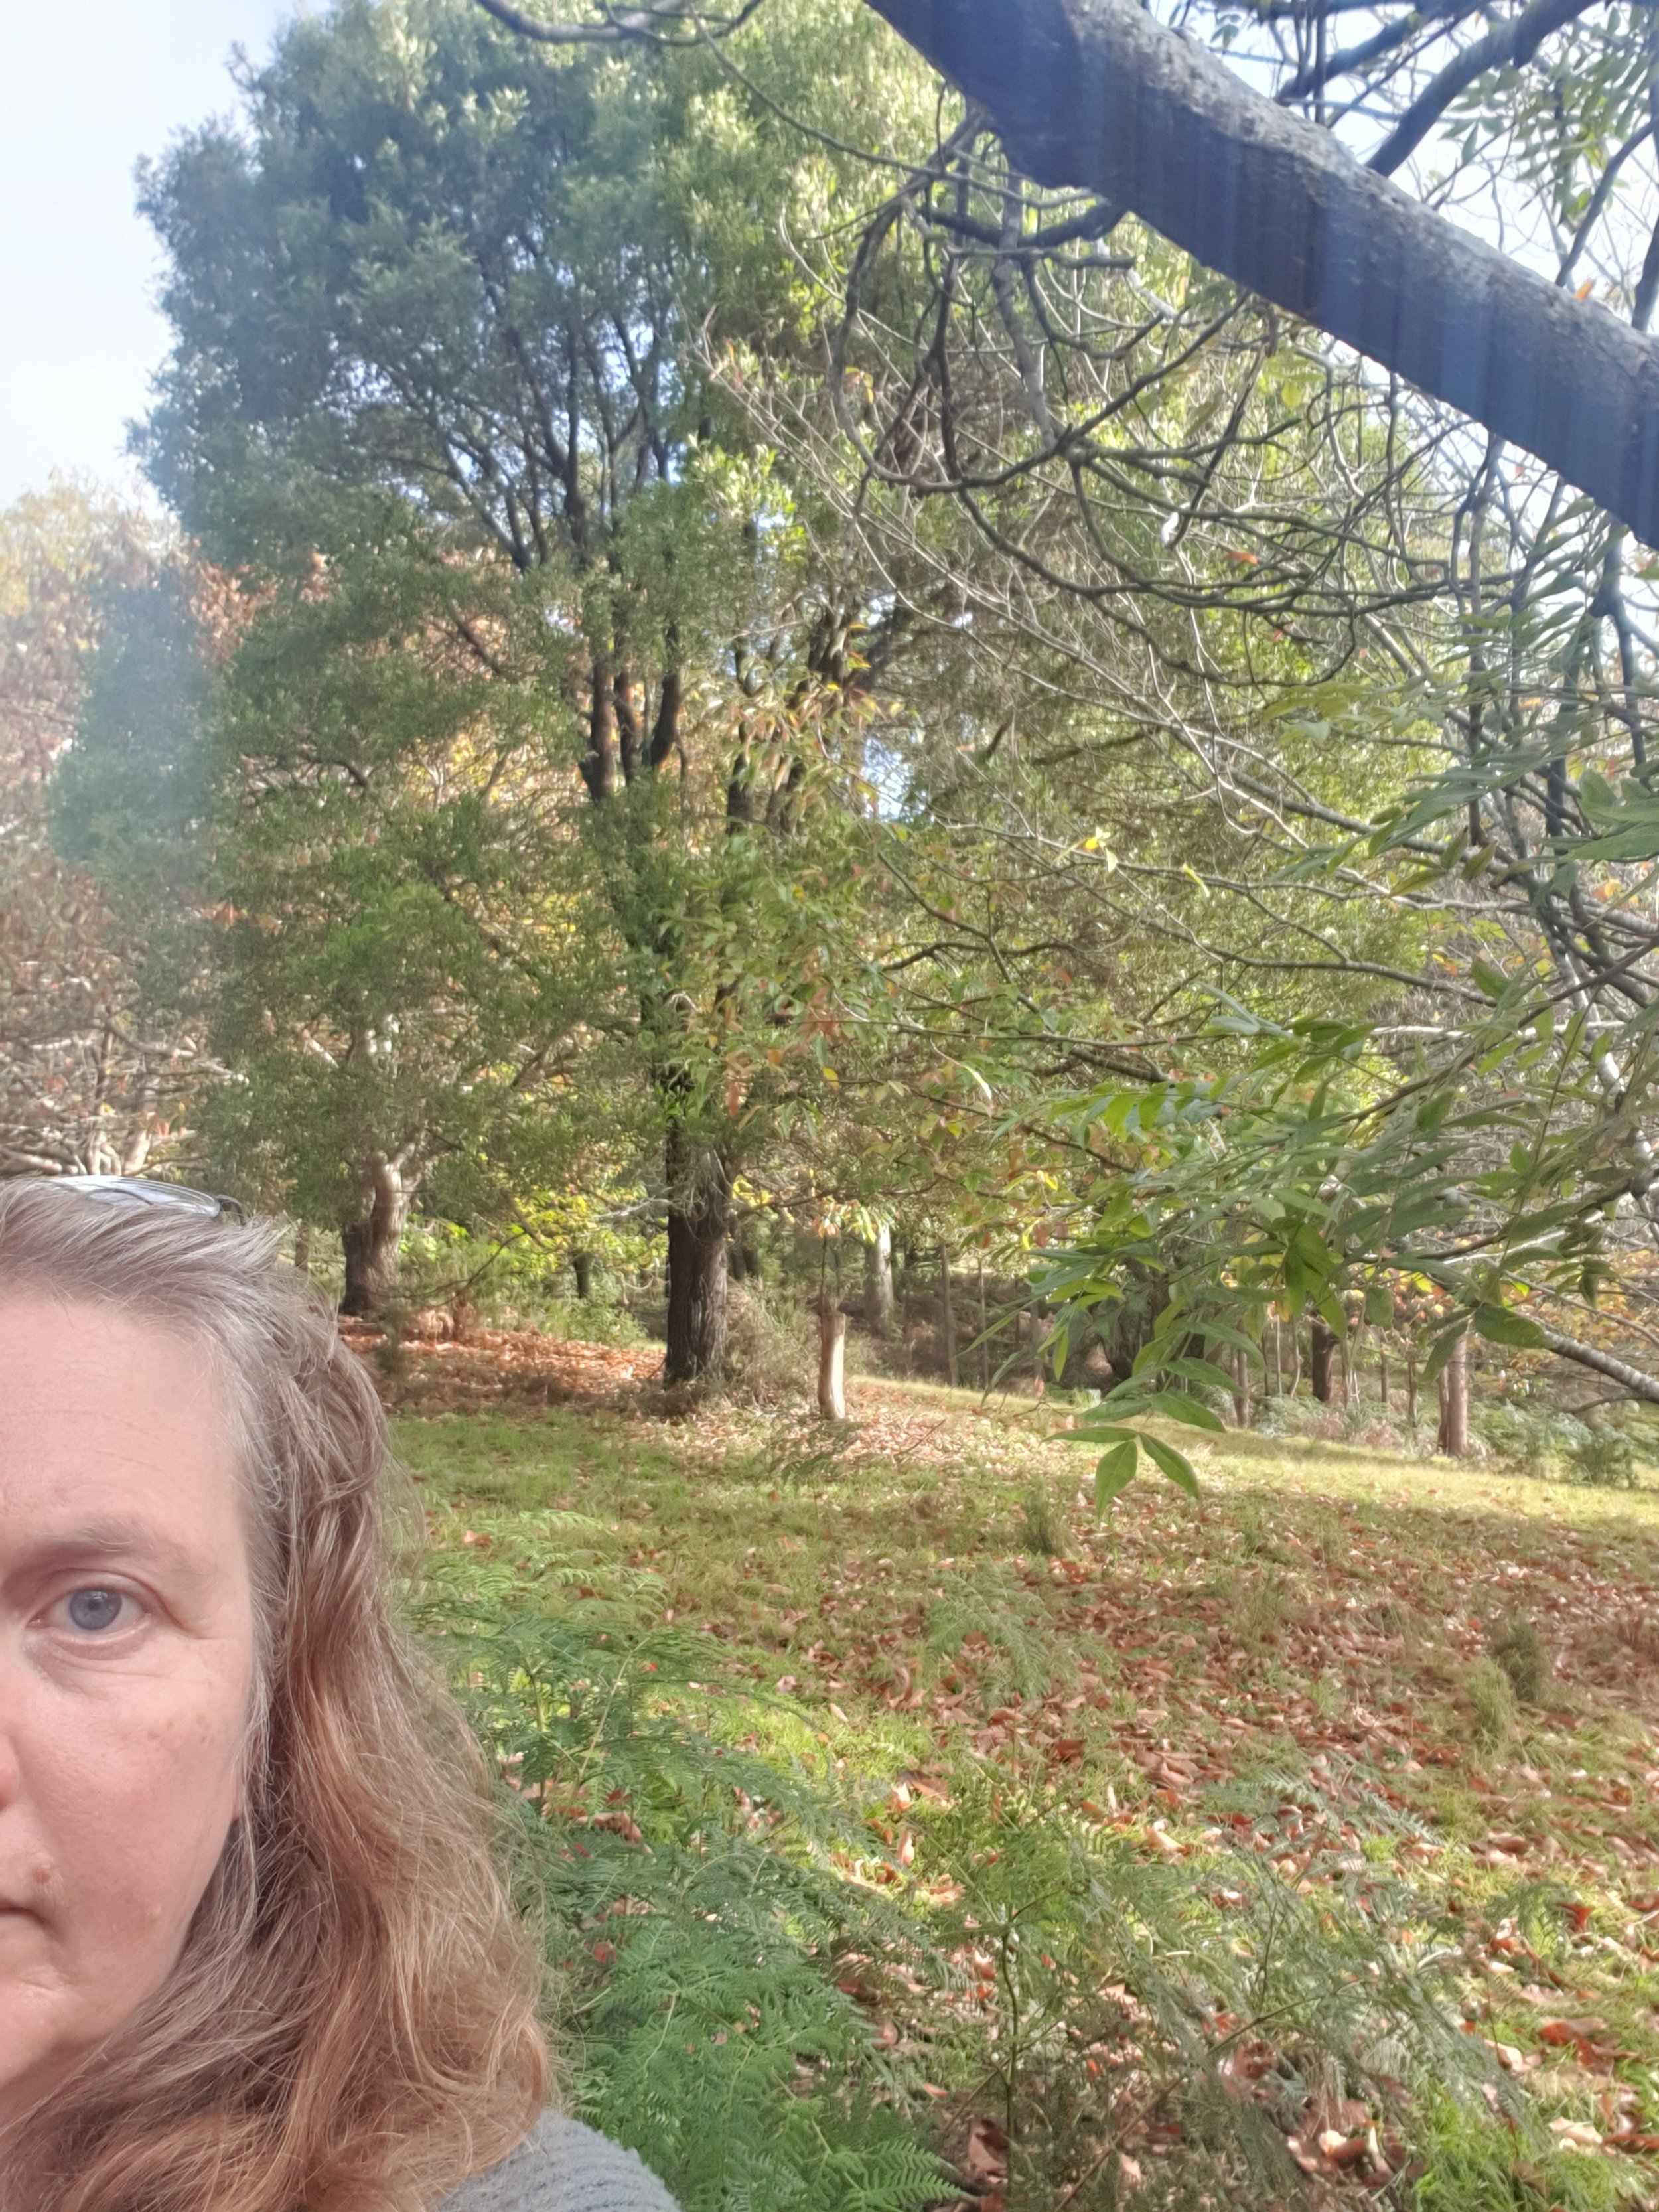 Woman with half face visible with trees behind her